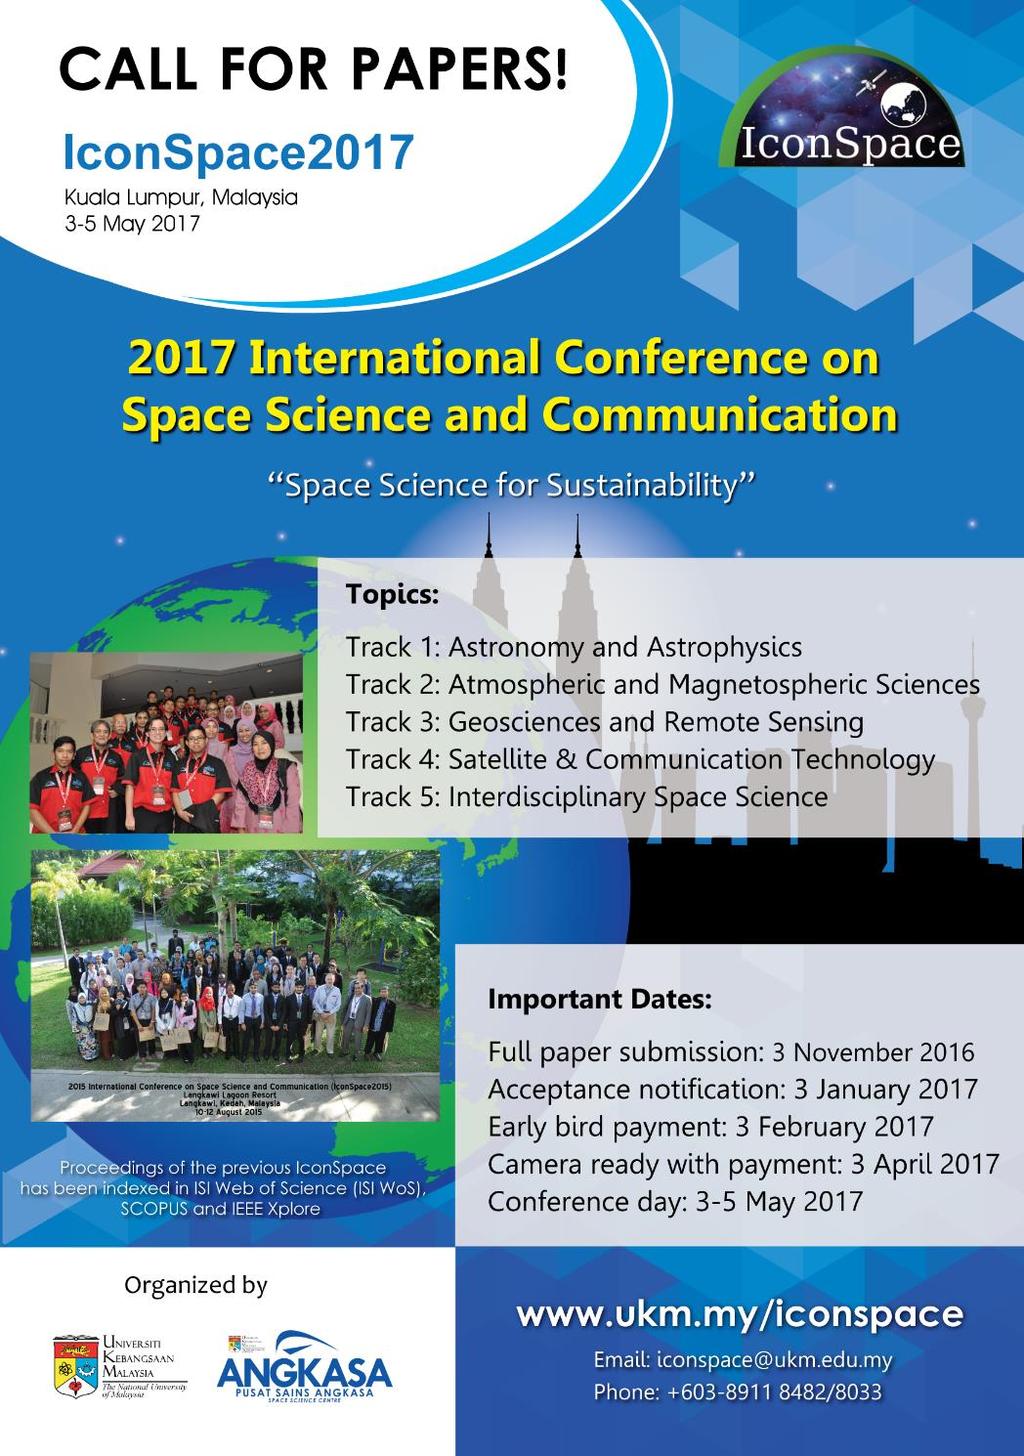 IconSpace 2017 3-5 May 2017 in Kuala Lumpur Publications: 1. Book Chapter Published by Springer 2.